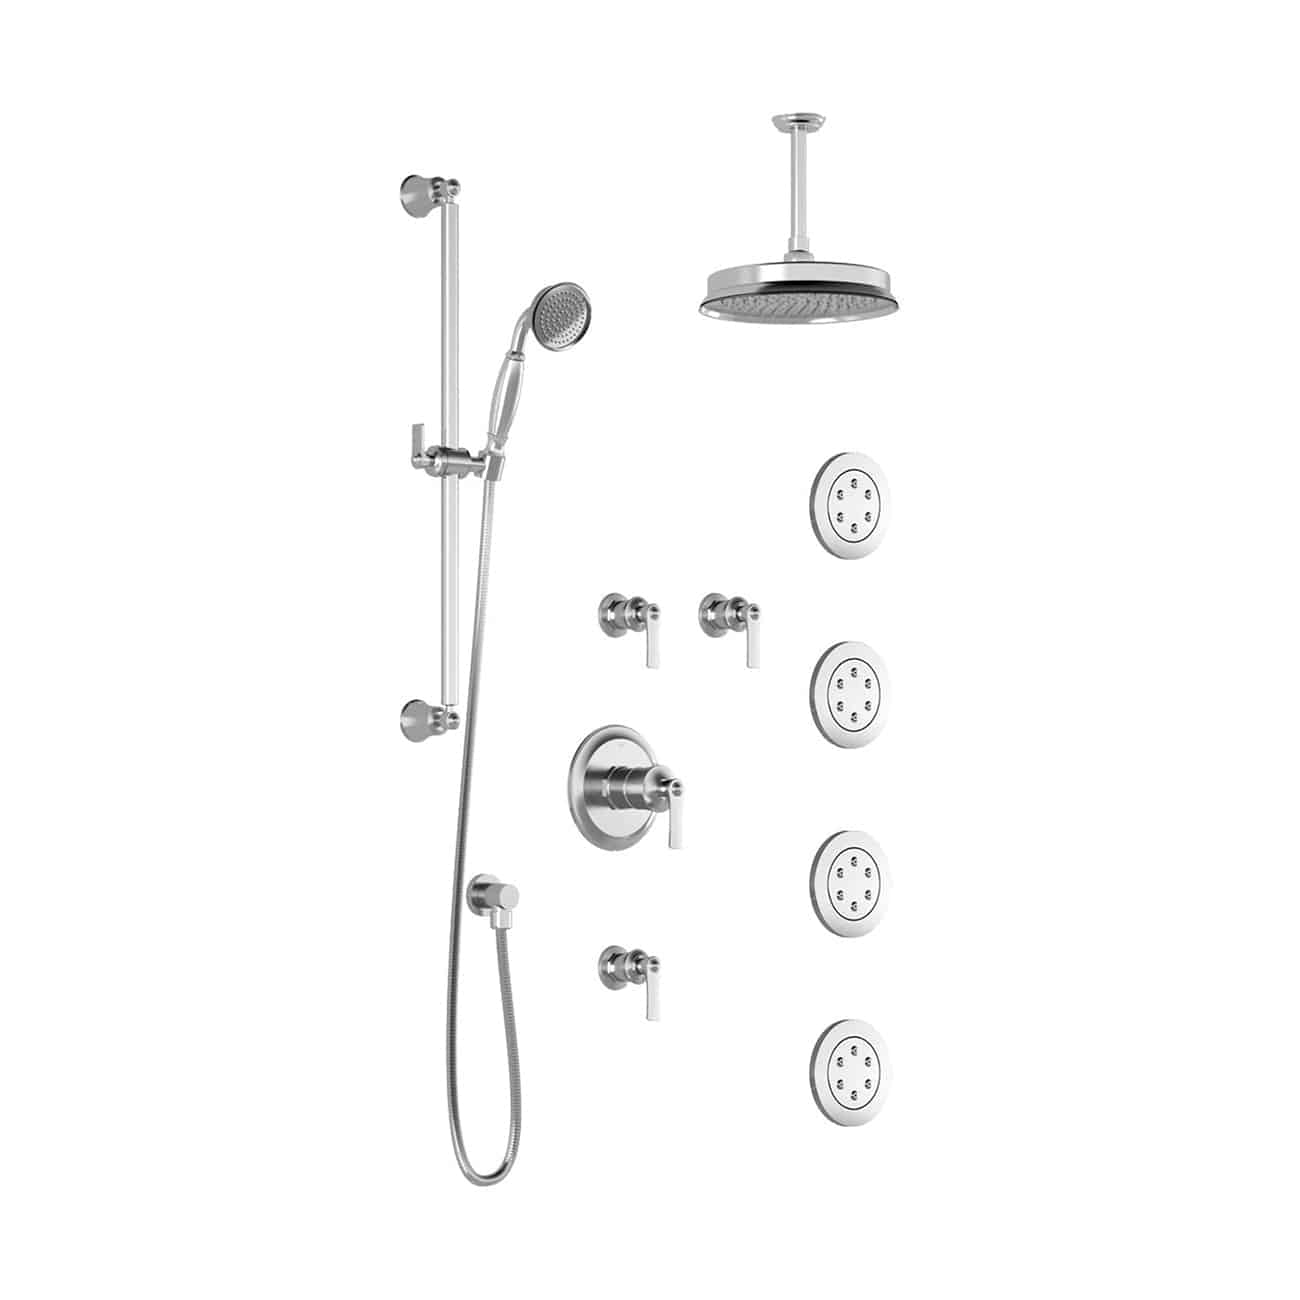 Kalia RUSTIK T375 Thermostatic Shower System with Vertical Ceiling Arm- Chrome